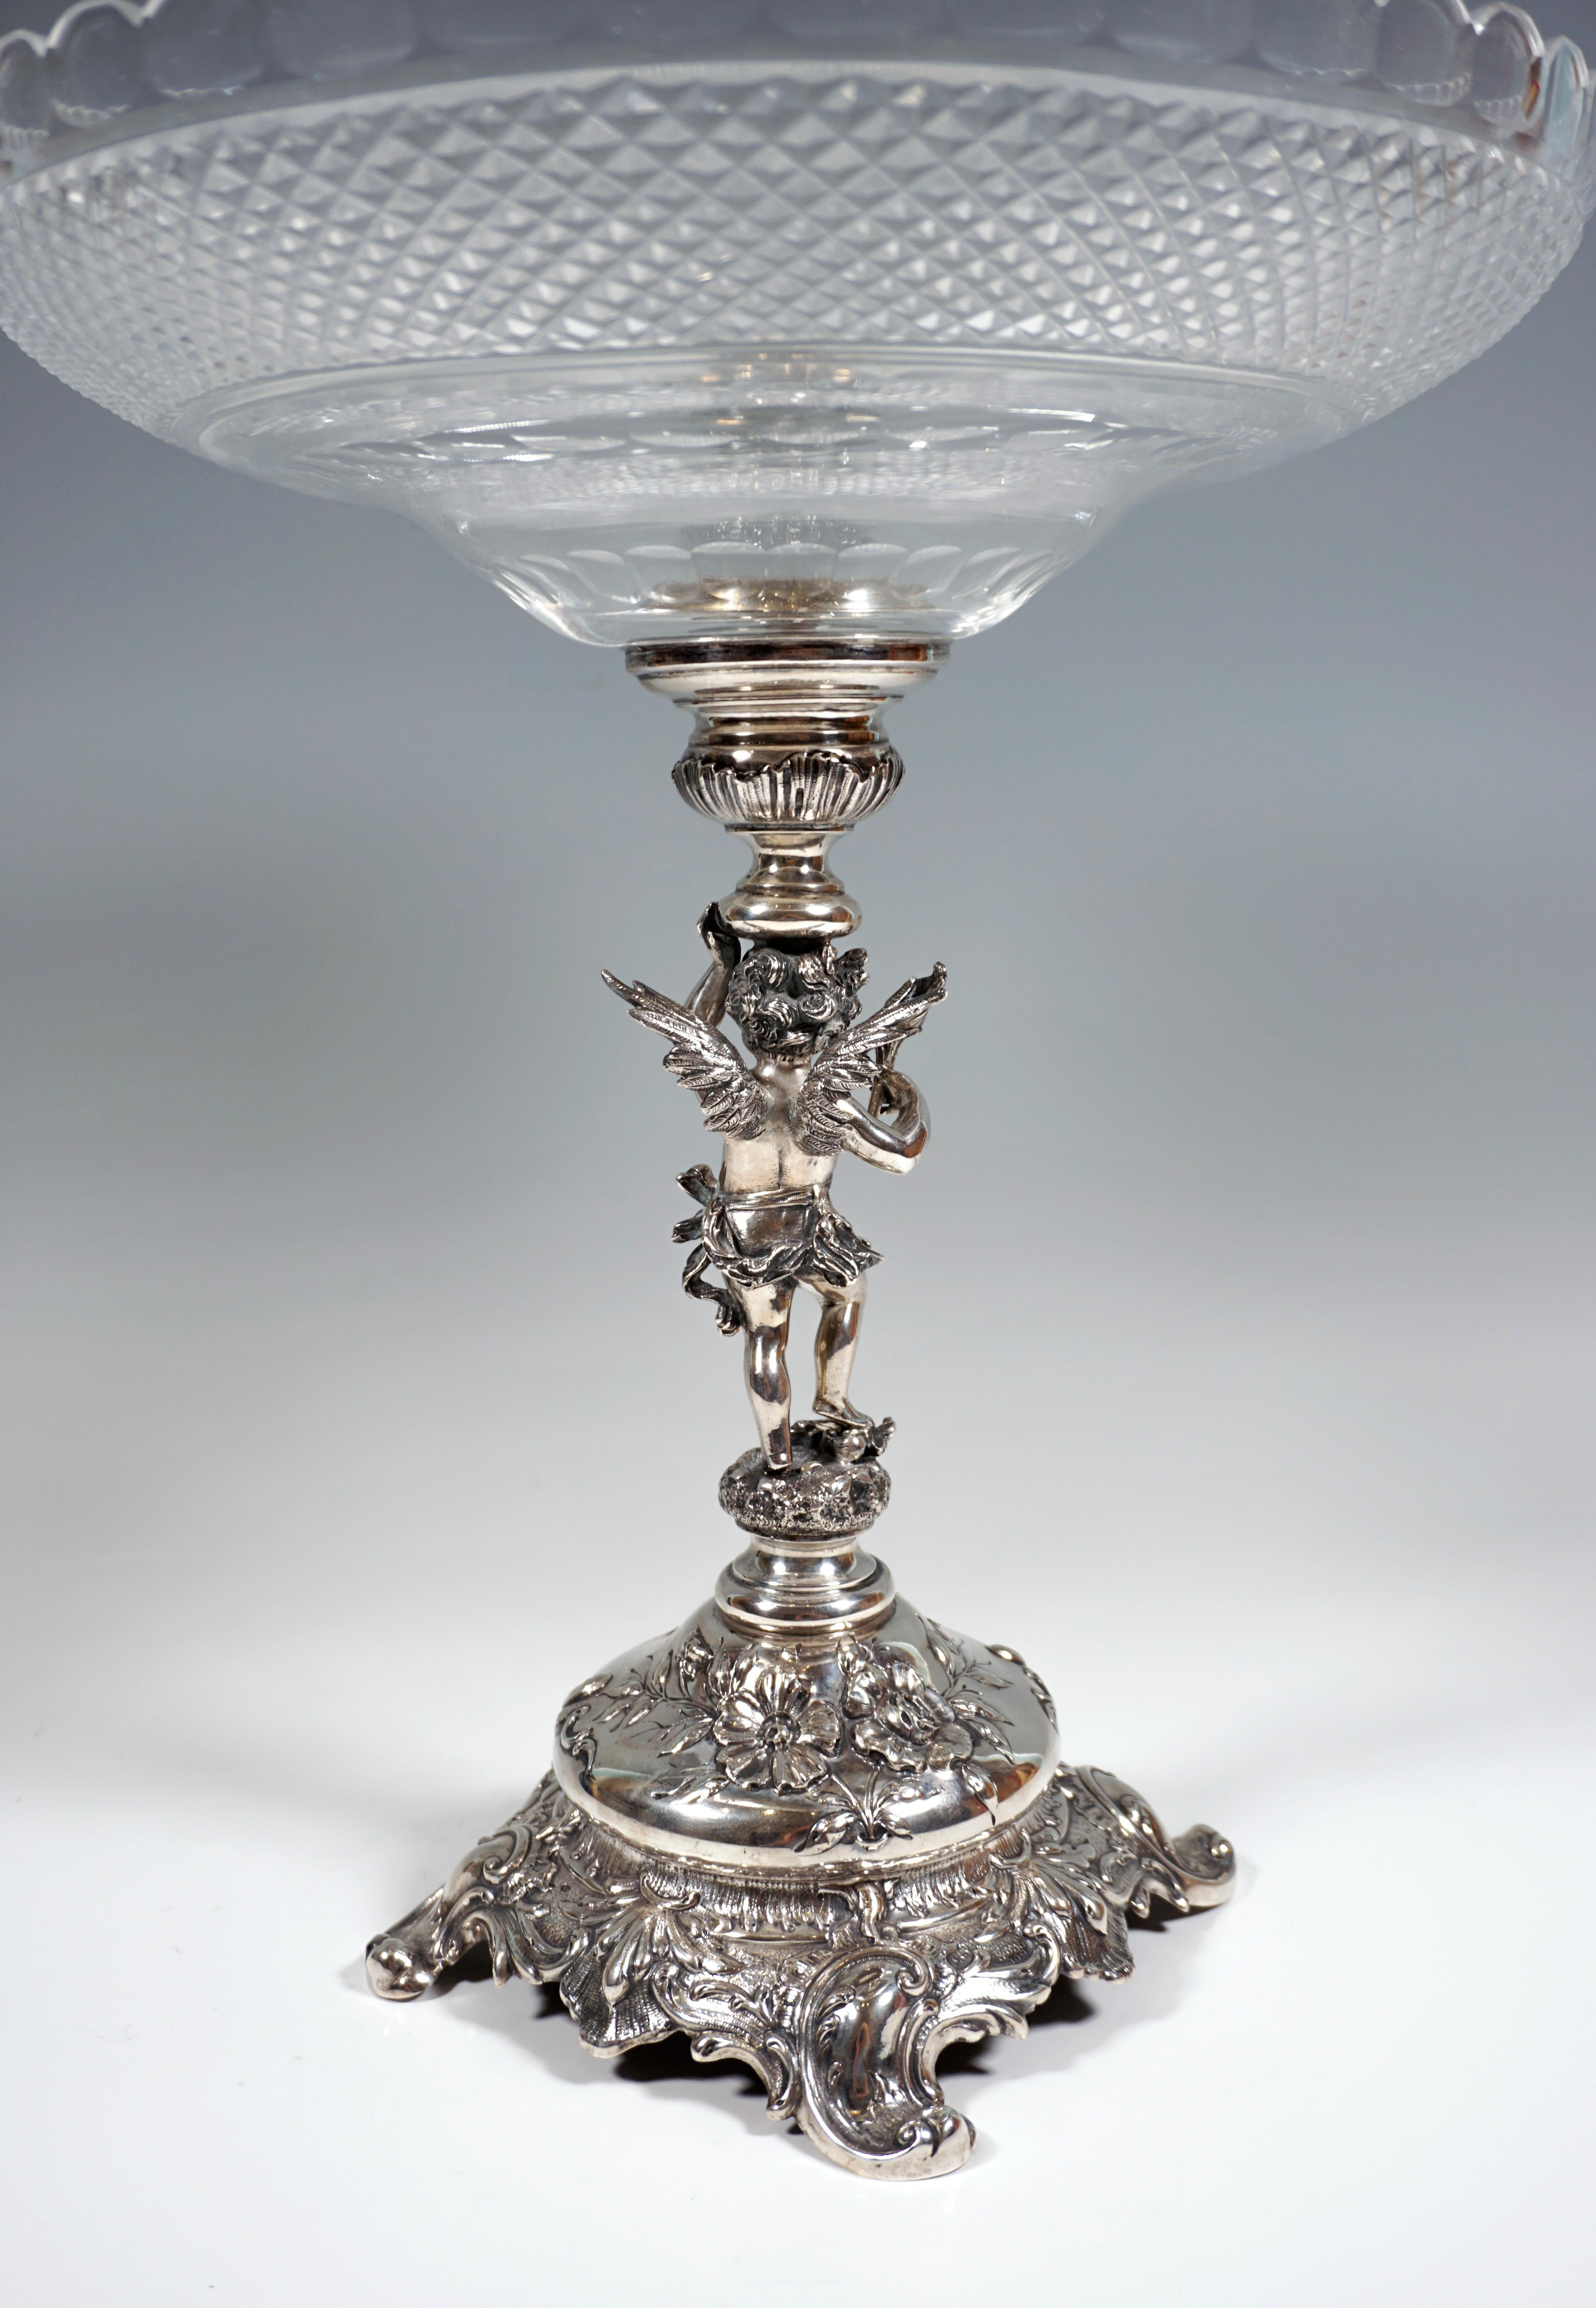 Early 20th Century Art Nouveau Vienna Silver Centerpiece with Cupid as a Bowl Carrier, Around 1900